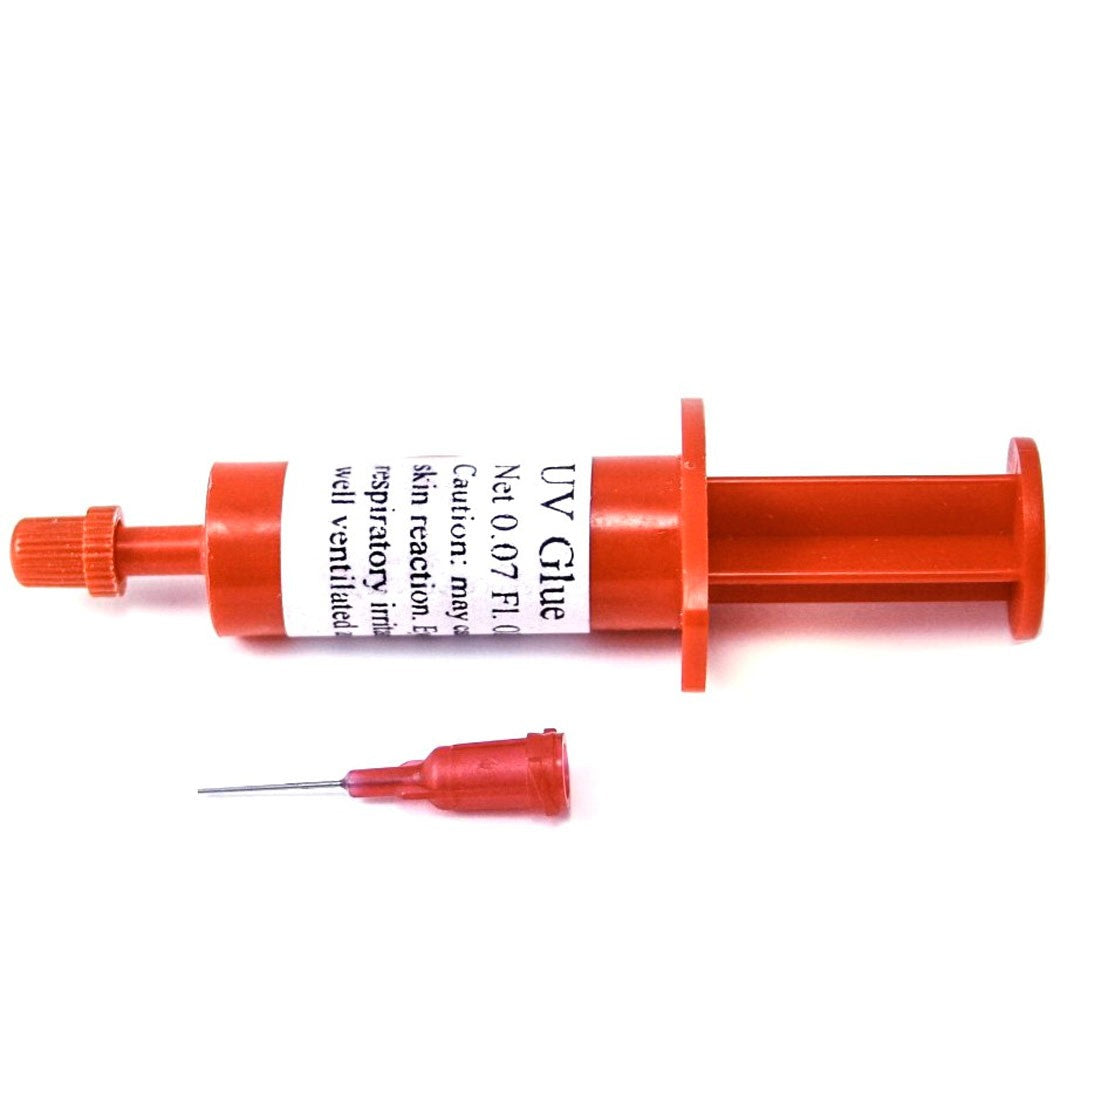 CE-250, Watch Crystal UV Glue with Tip